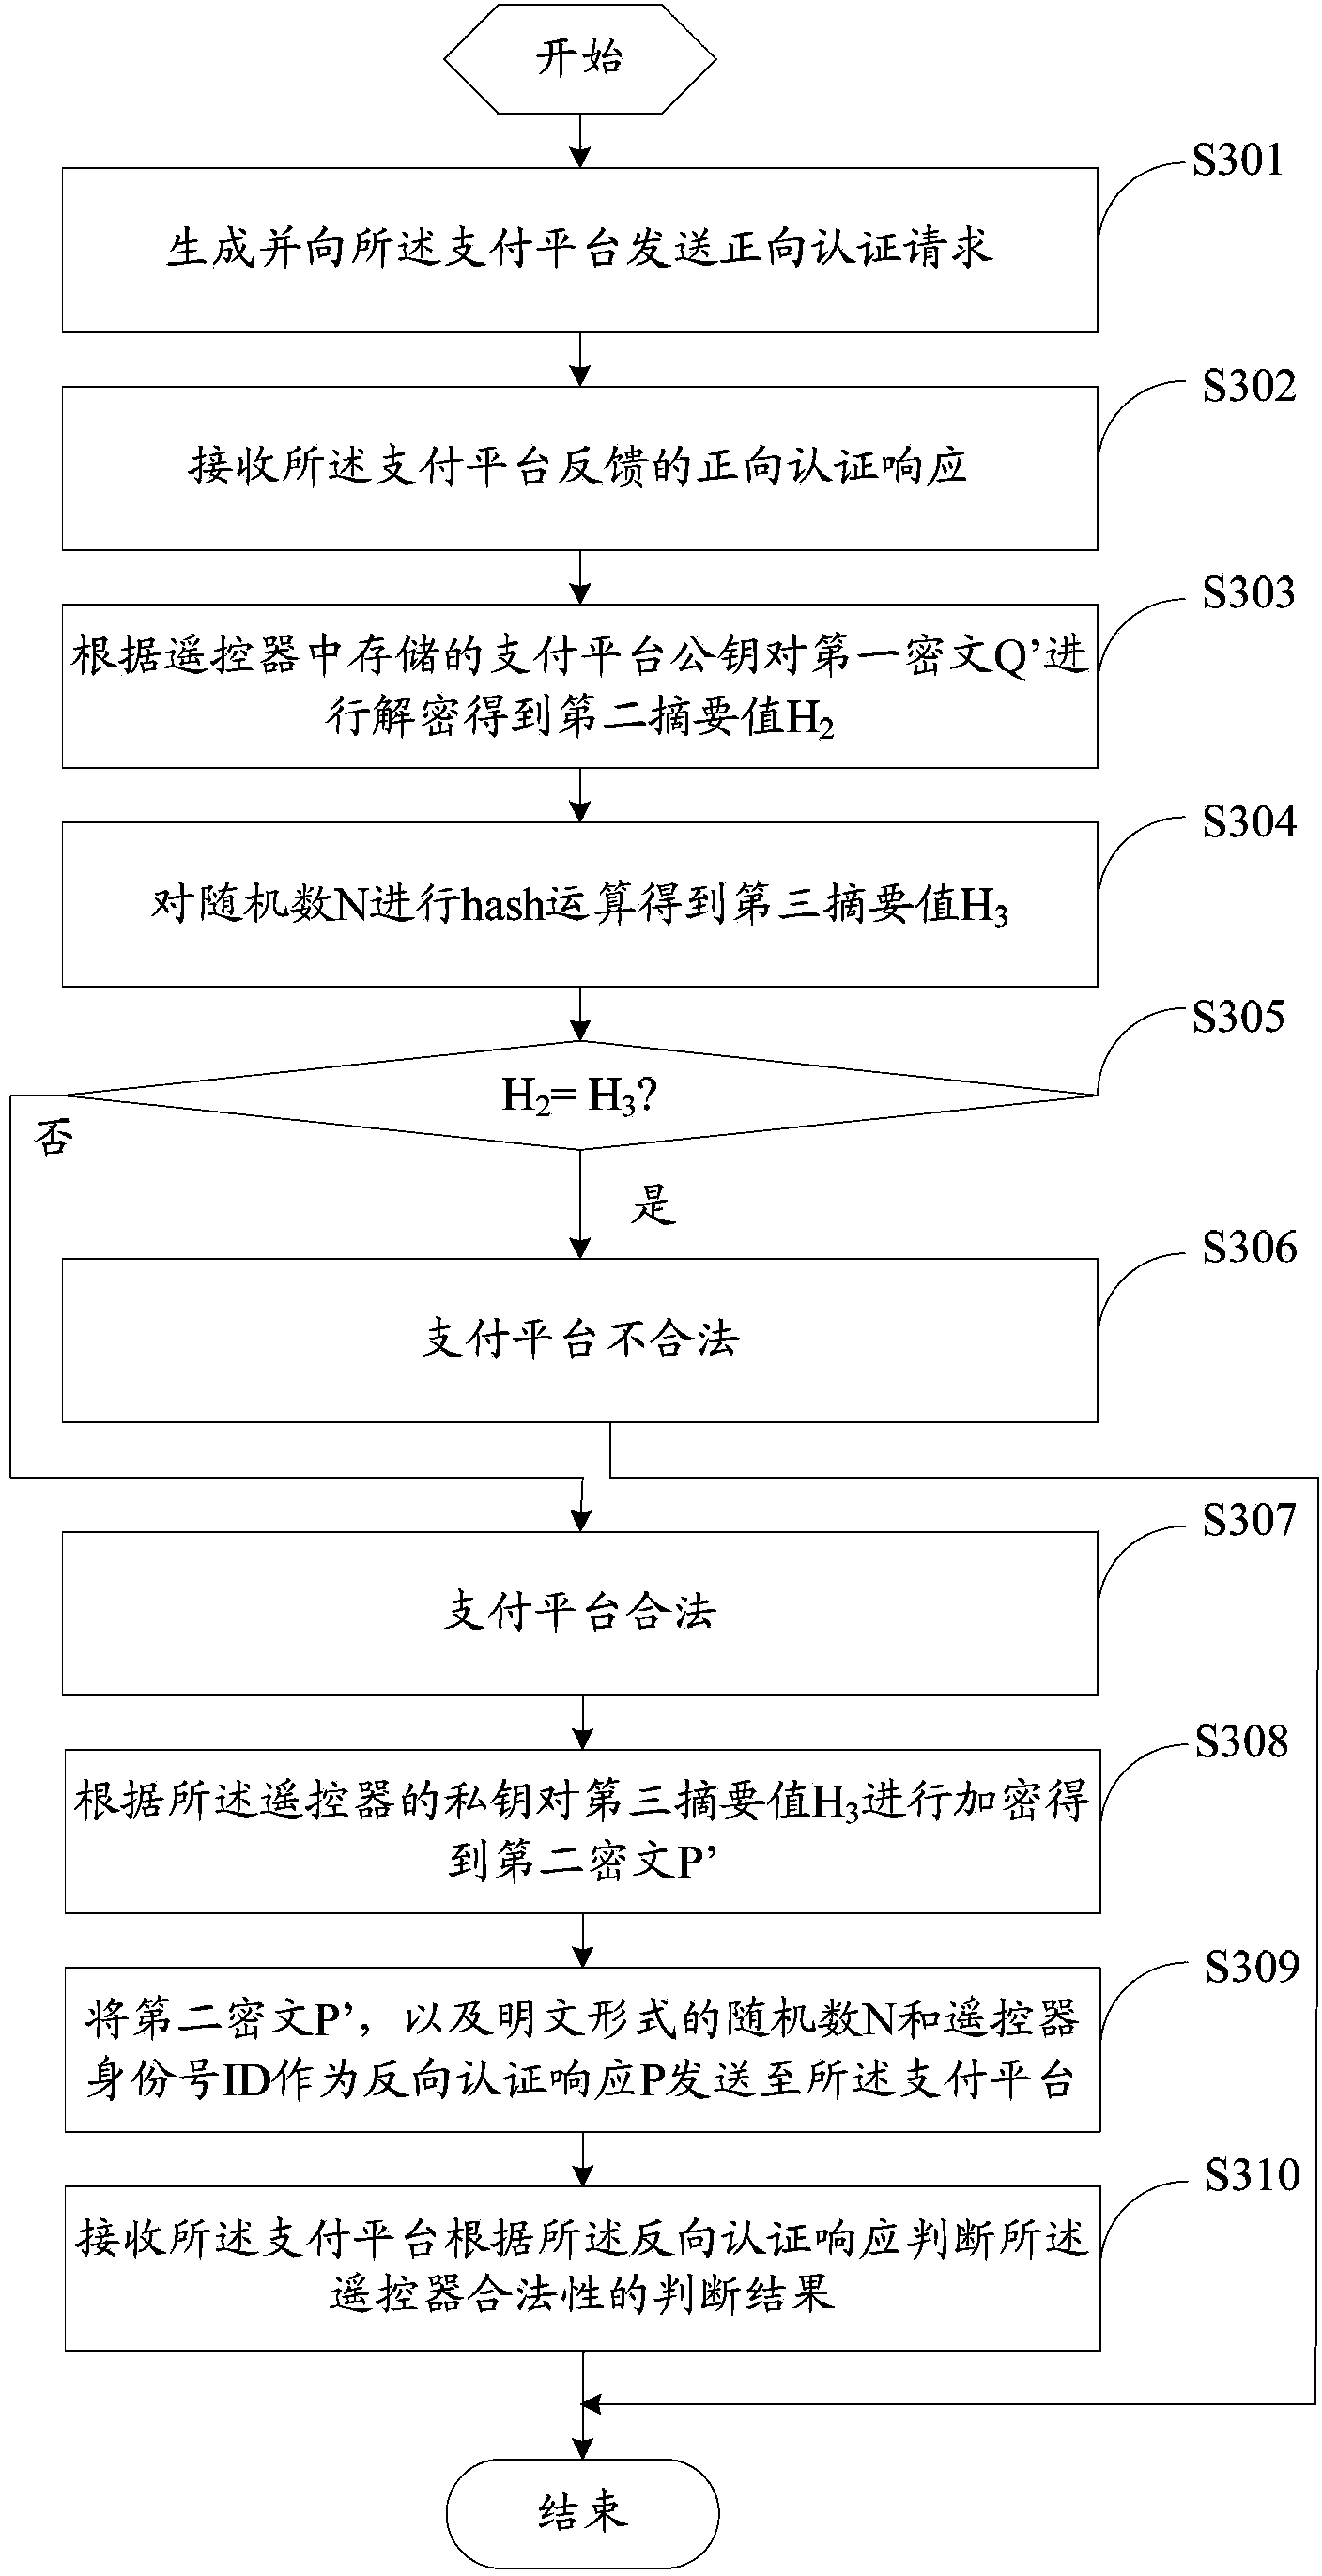 Safety authentication method and remote controller and television payment system using same